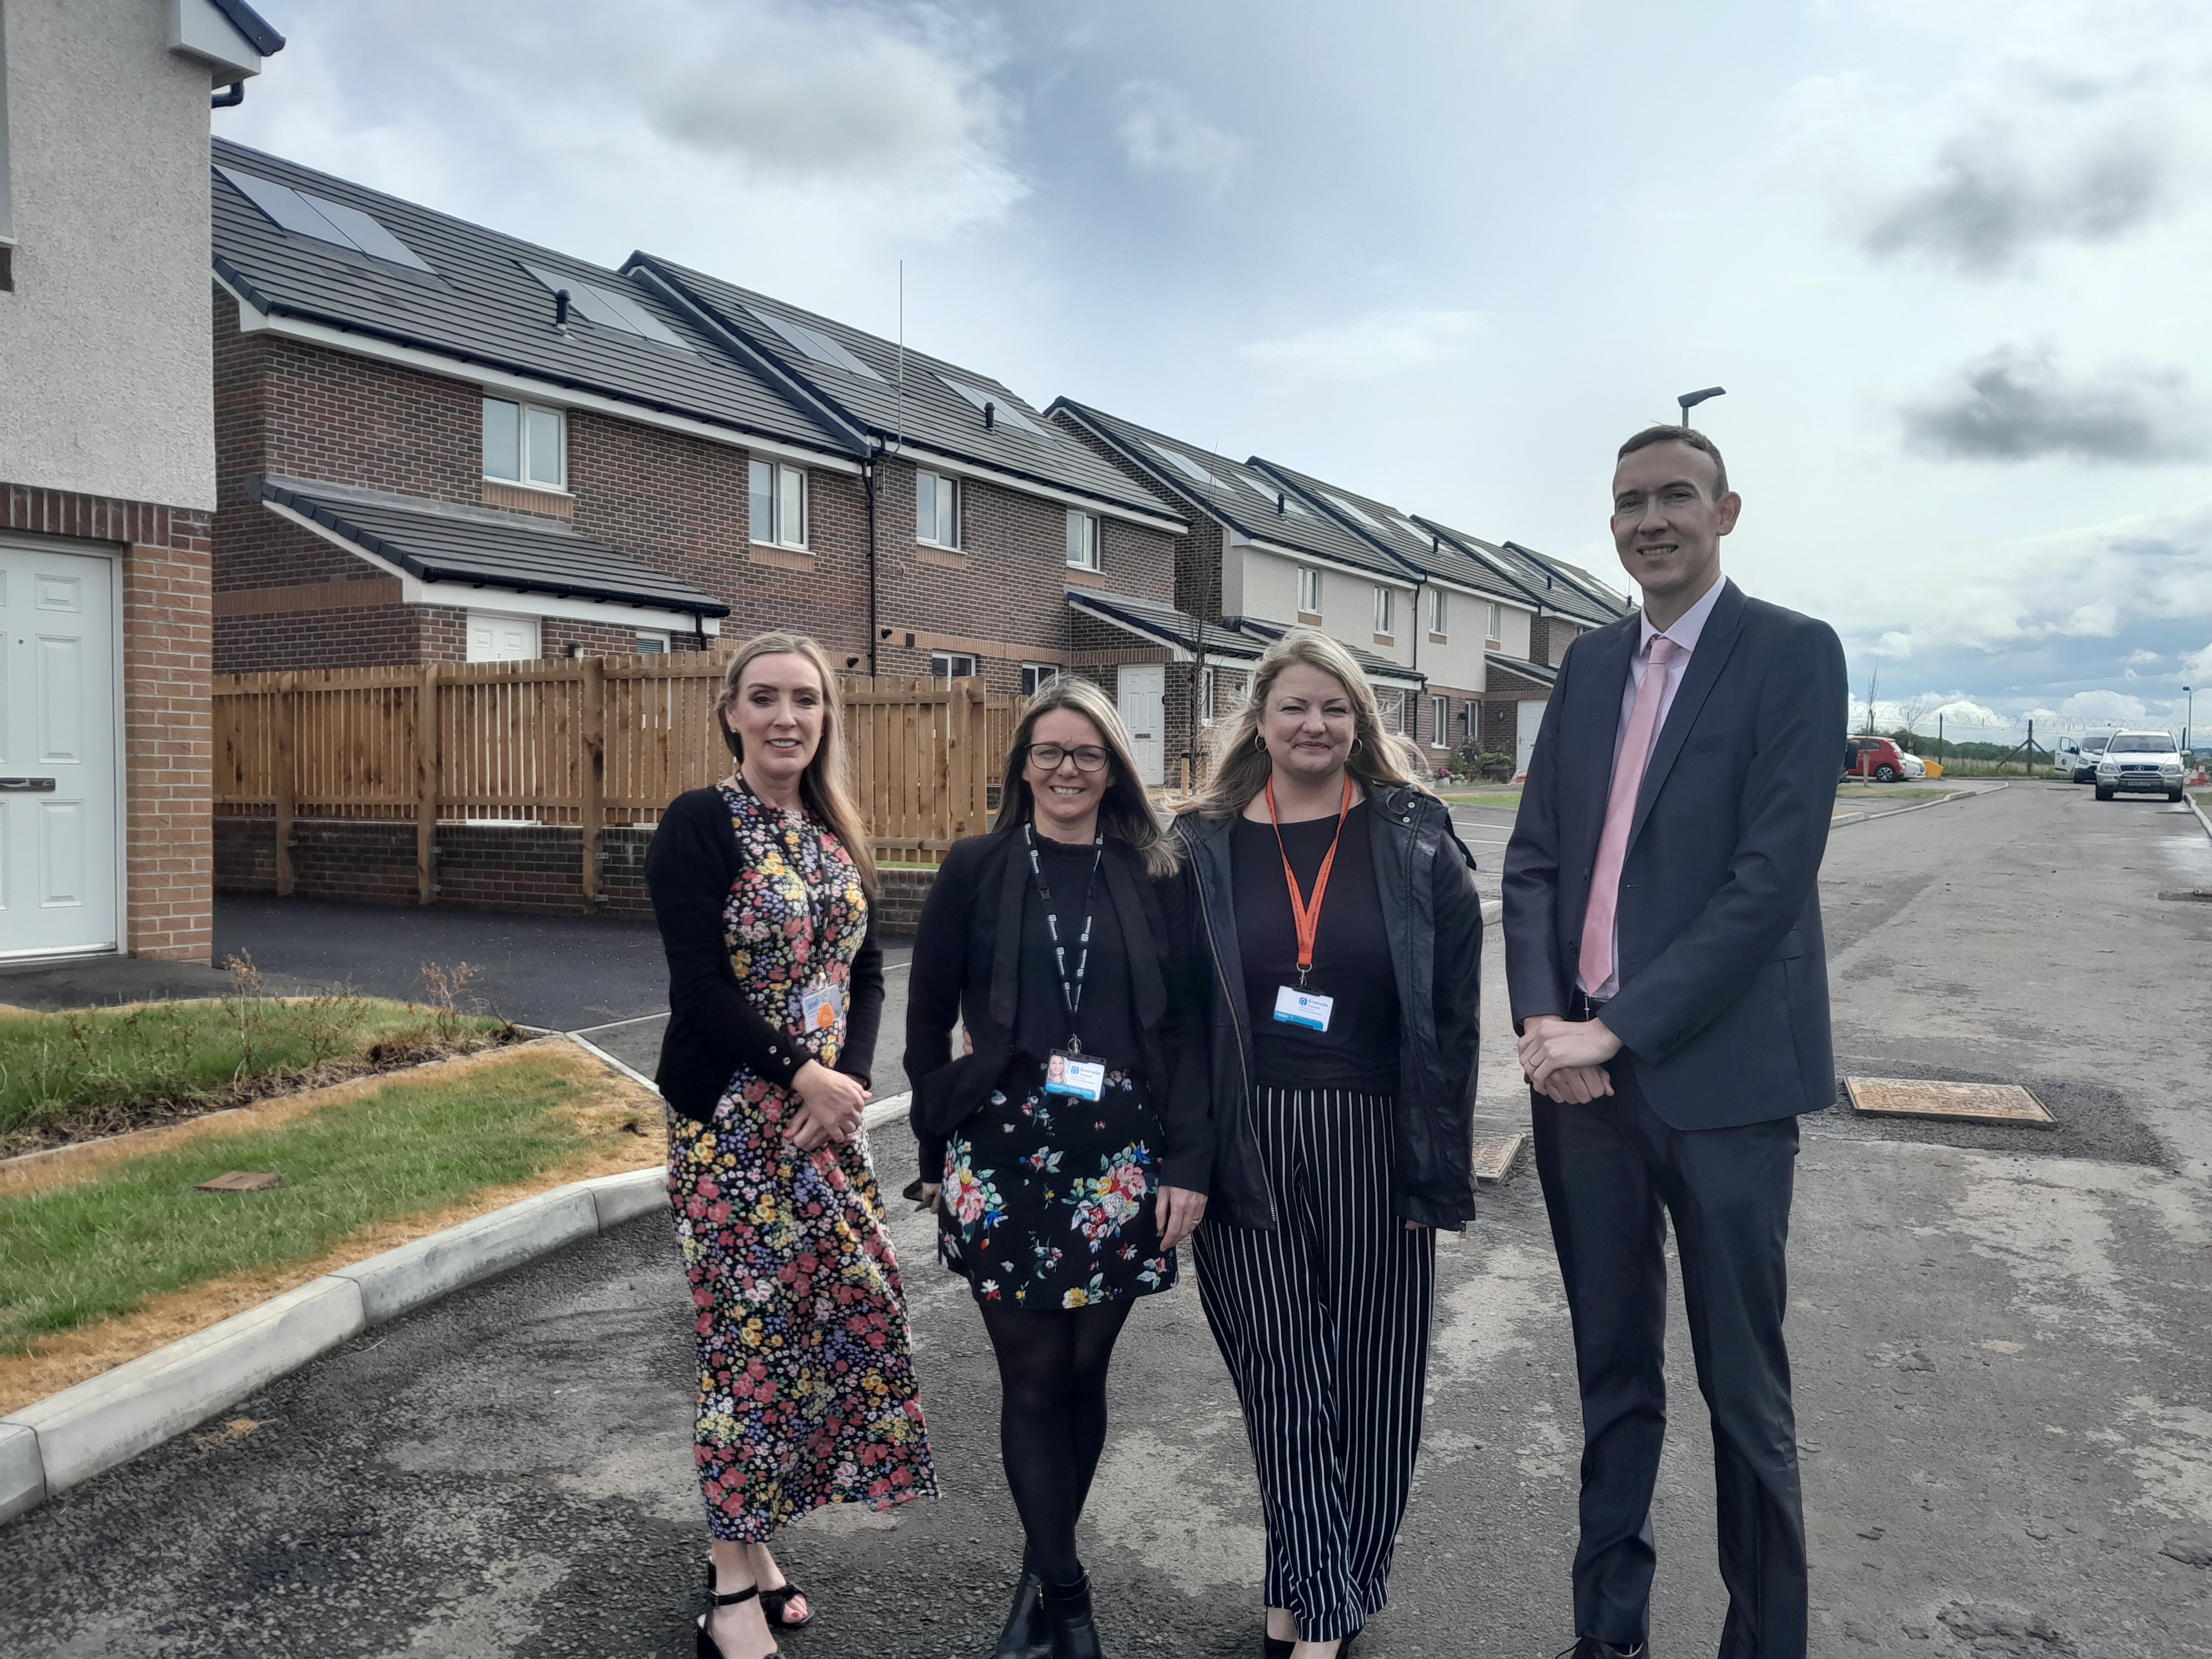 New affordable homes to benefit Ayrshire families